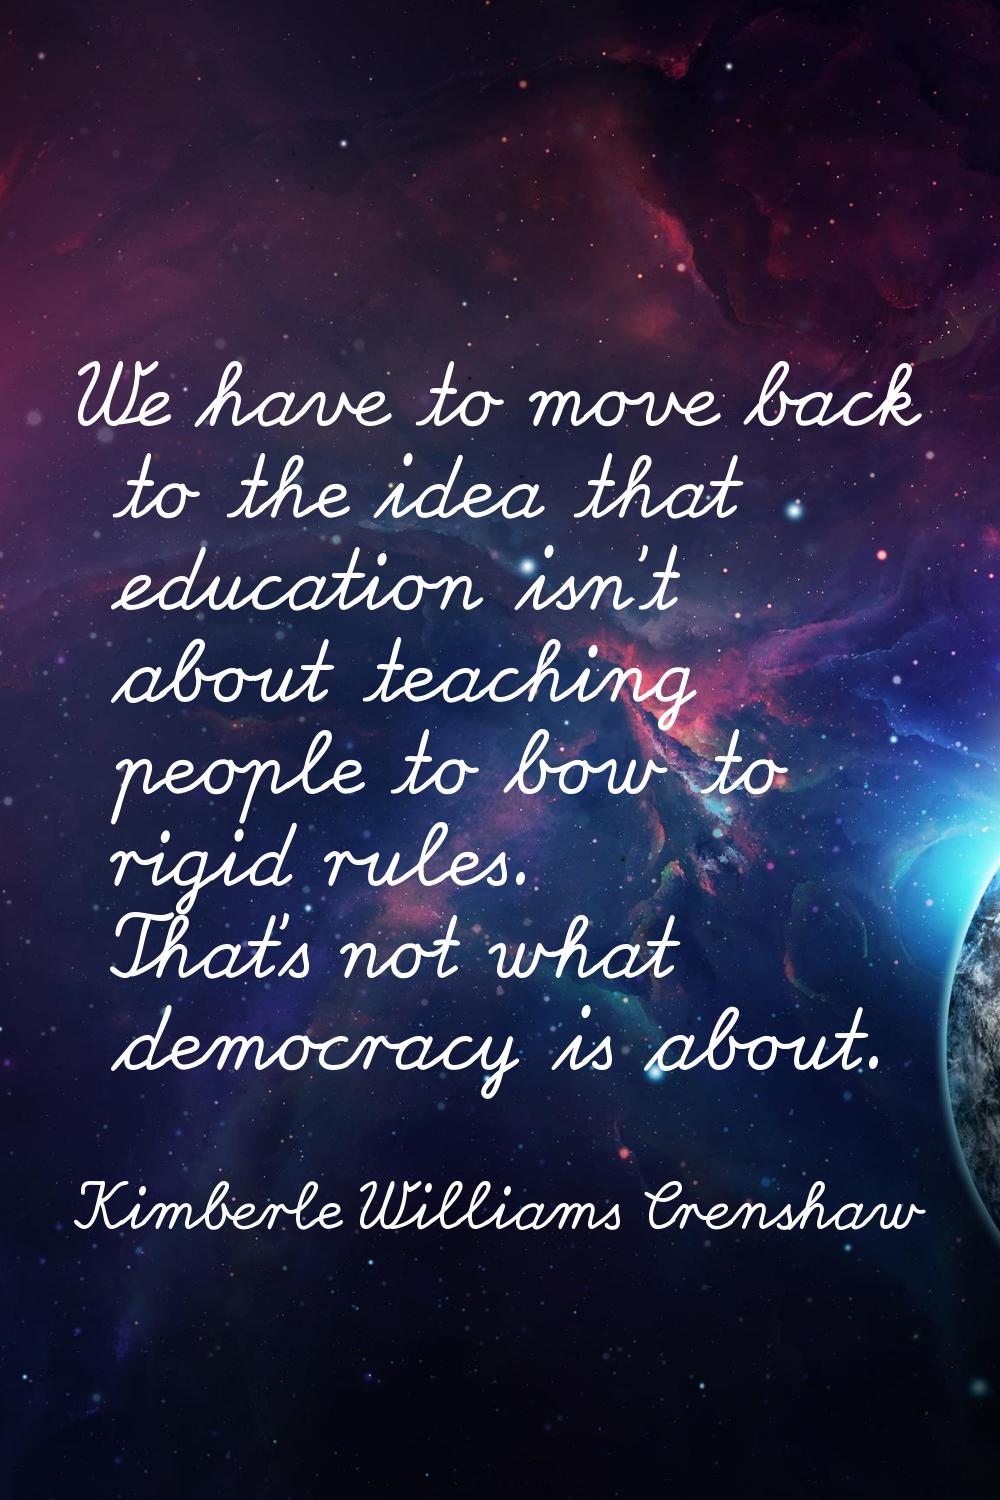 We have to move back to the idea that education isn't about teaching people to bow to rigid rules. 